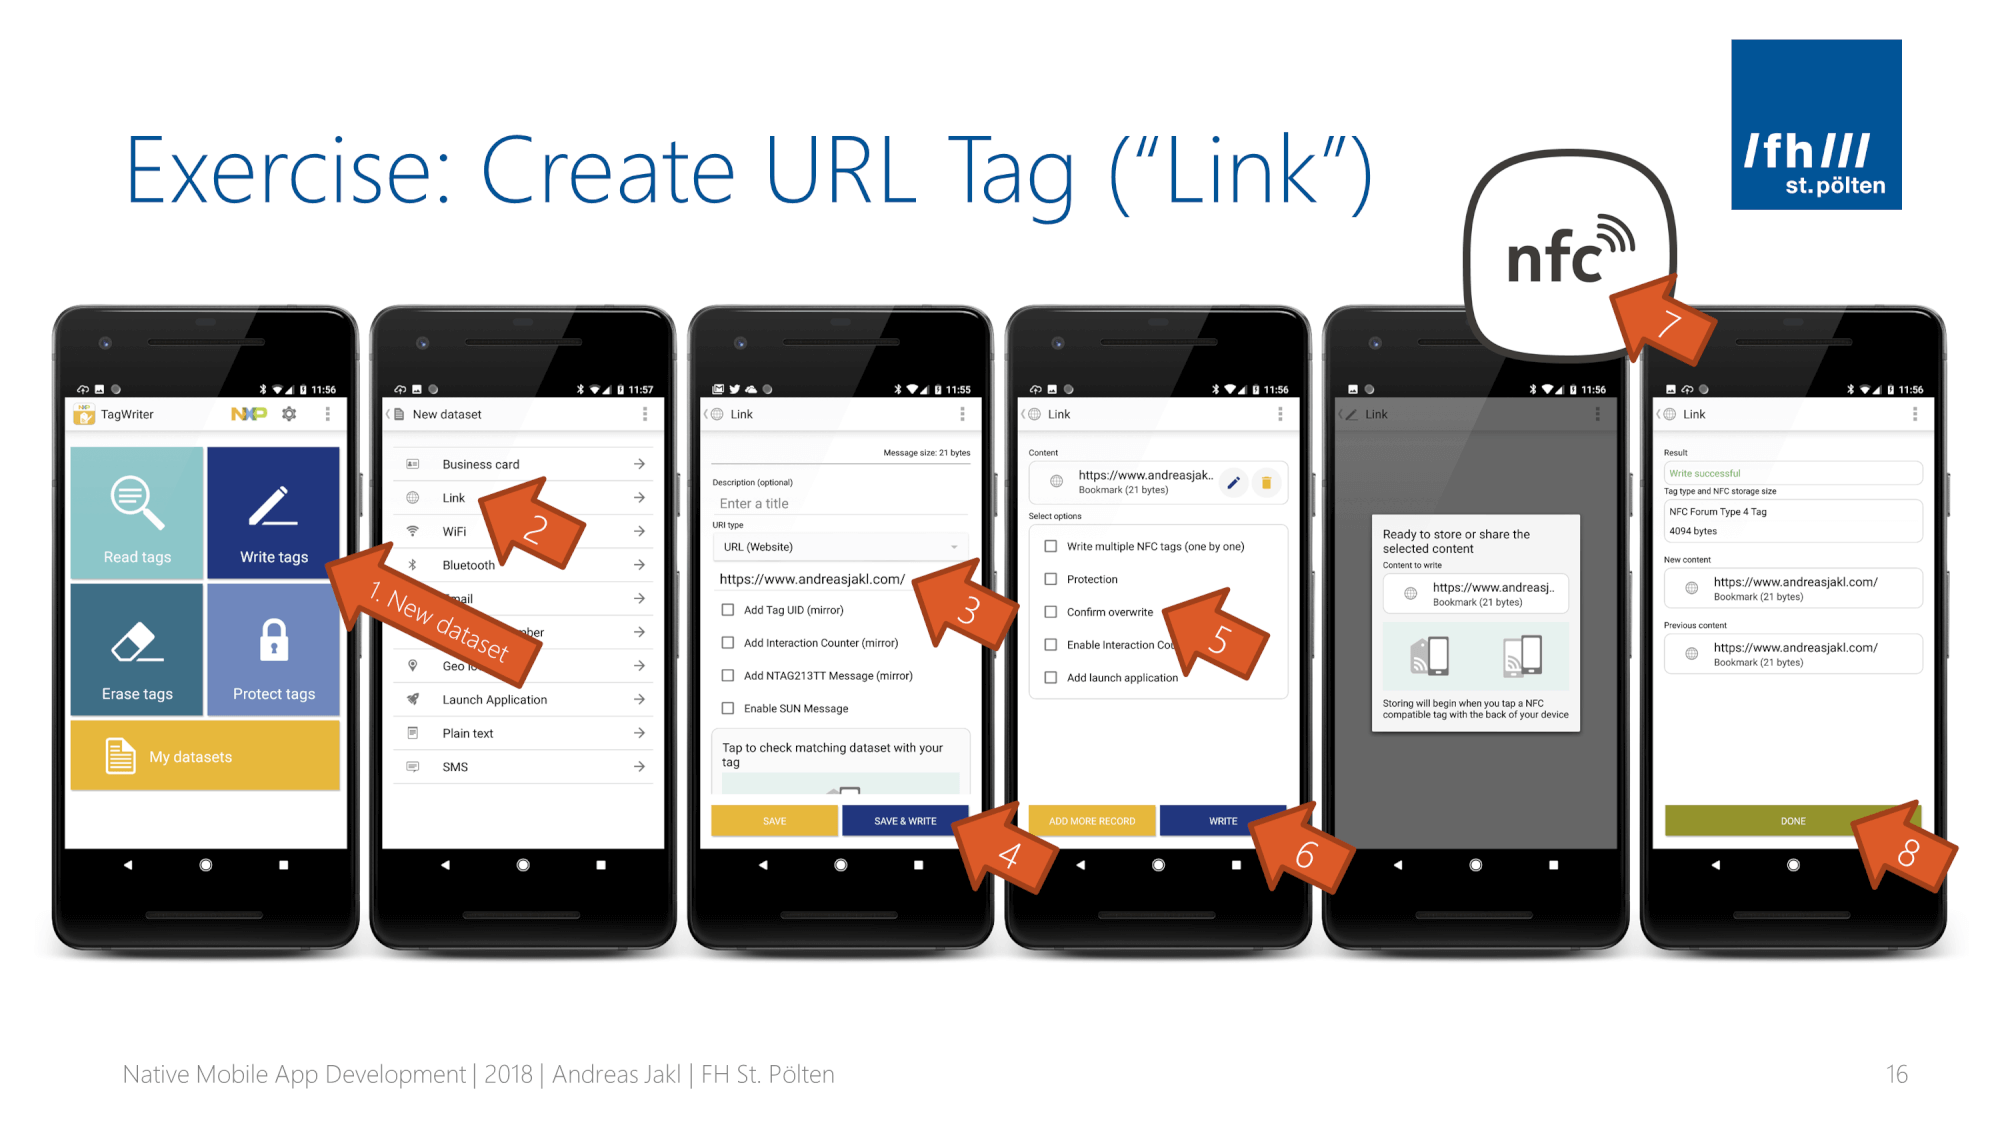 How to Use NFC Tags in Marketing - atlasRFIDstore